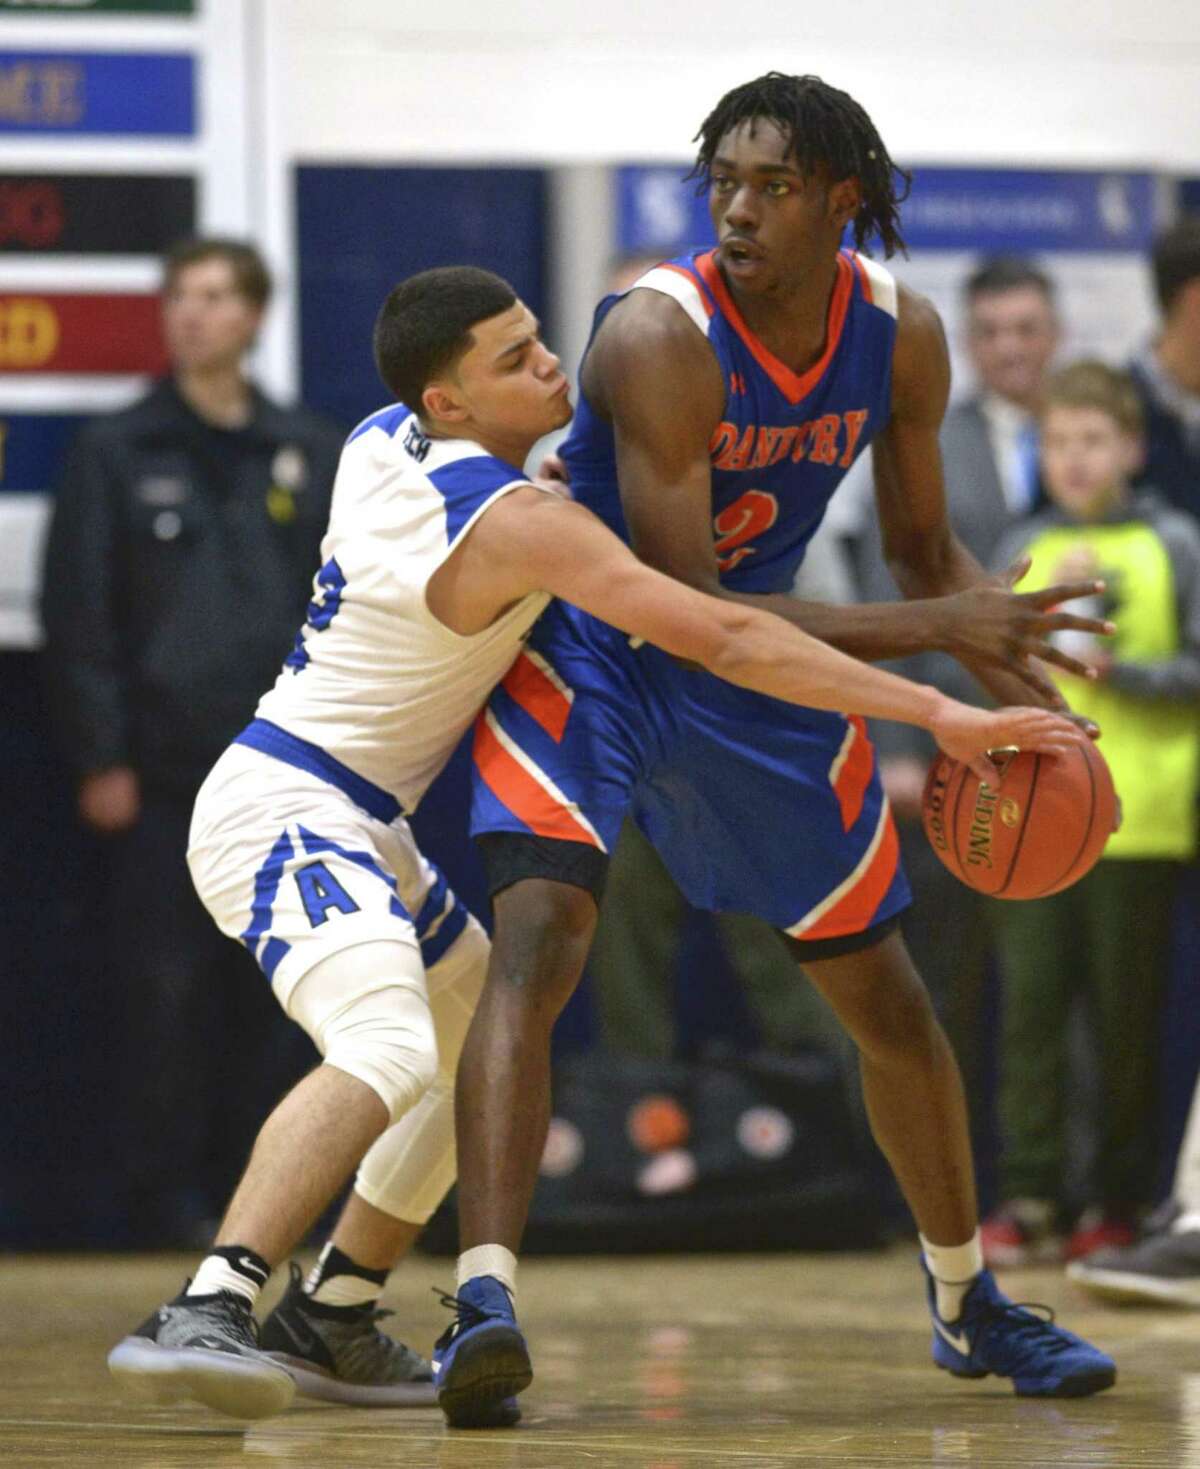 Tech's Marcos Gonzalez (2) knocks away the ball from Danbury's Denali Burton (2) as Abbott Tech played Danbury High School in the opening game of The News Times Tip Off Classic basketball tournament, Thursday night, December 13, 2018, at Immaculate High School, in Danbury, Conn.